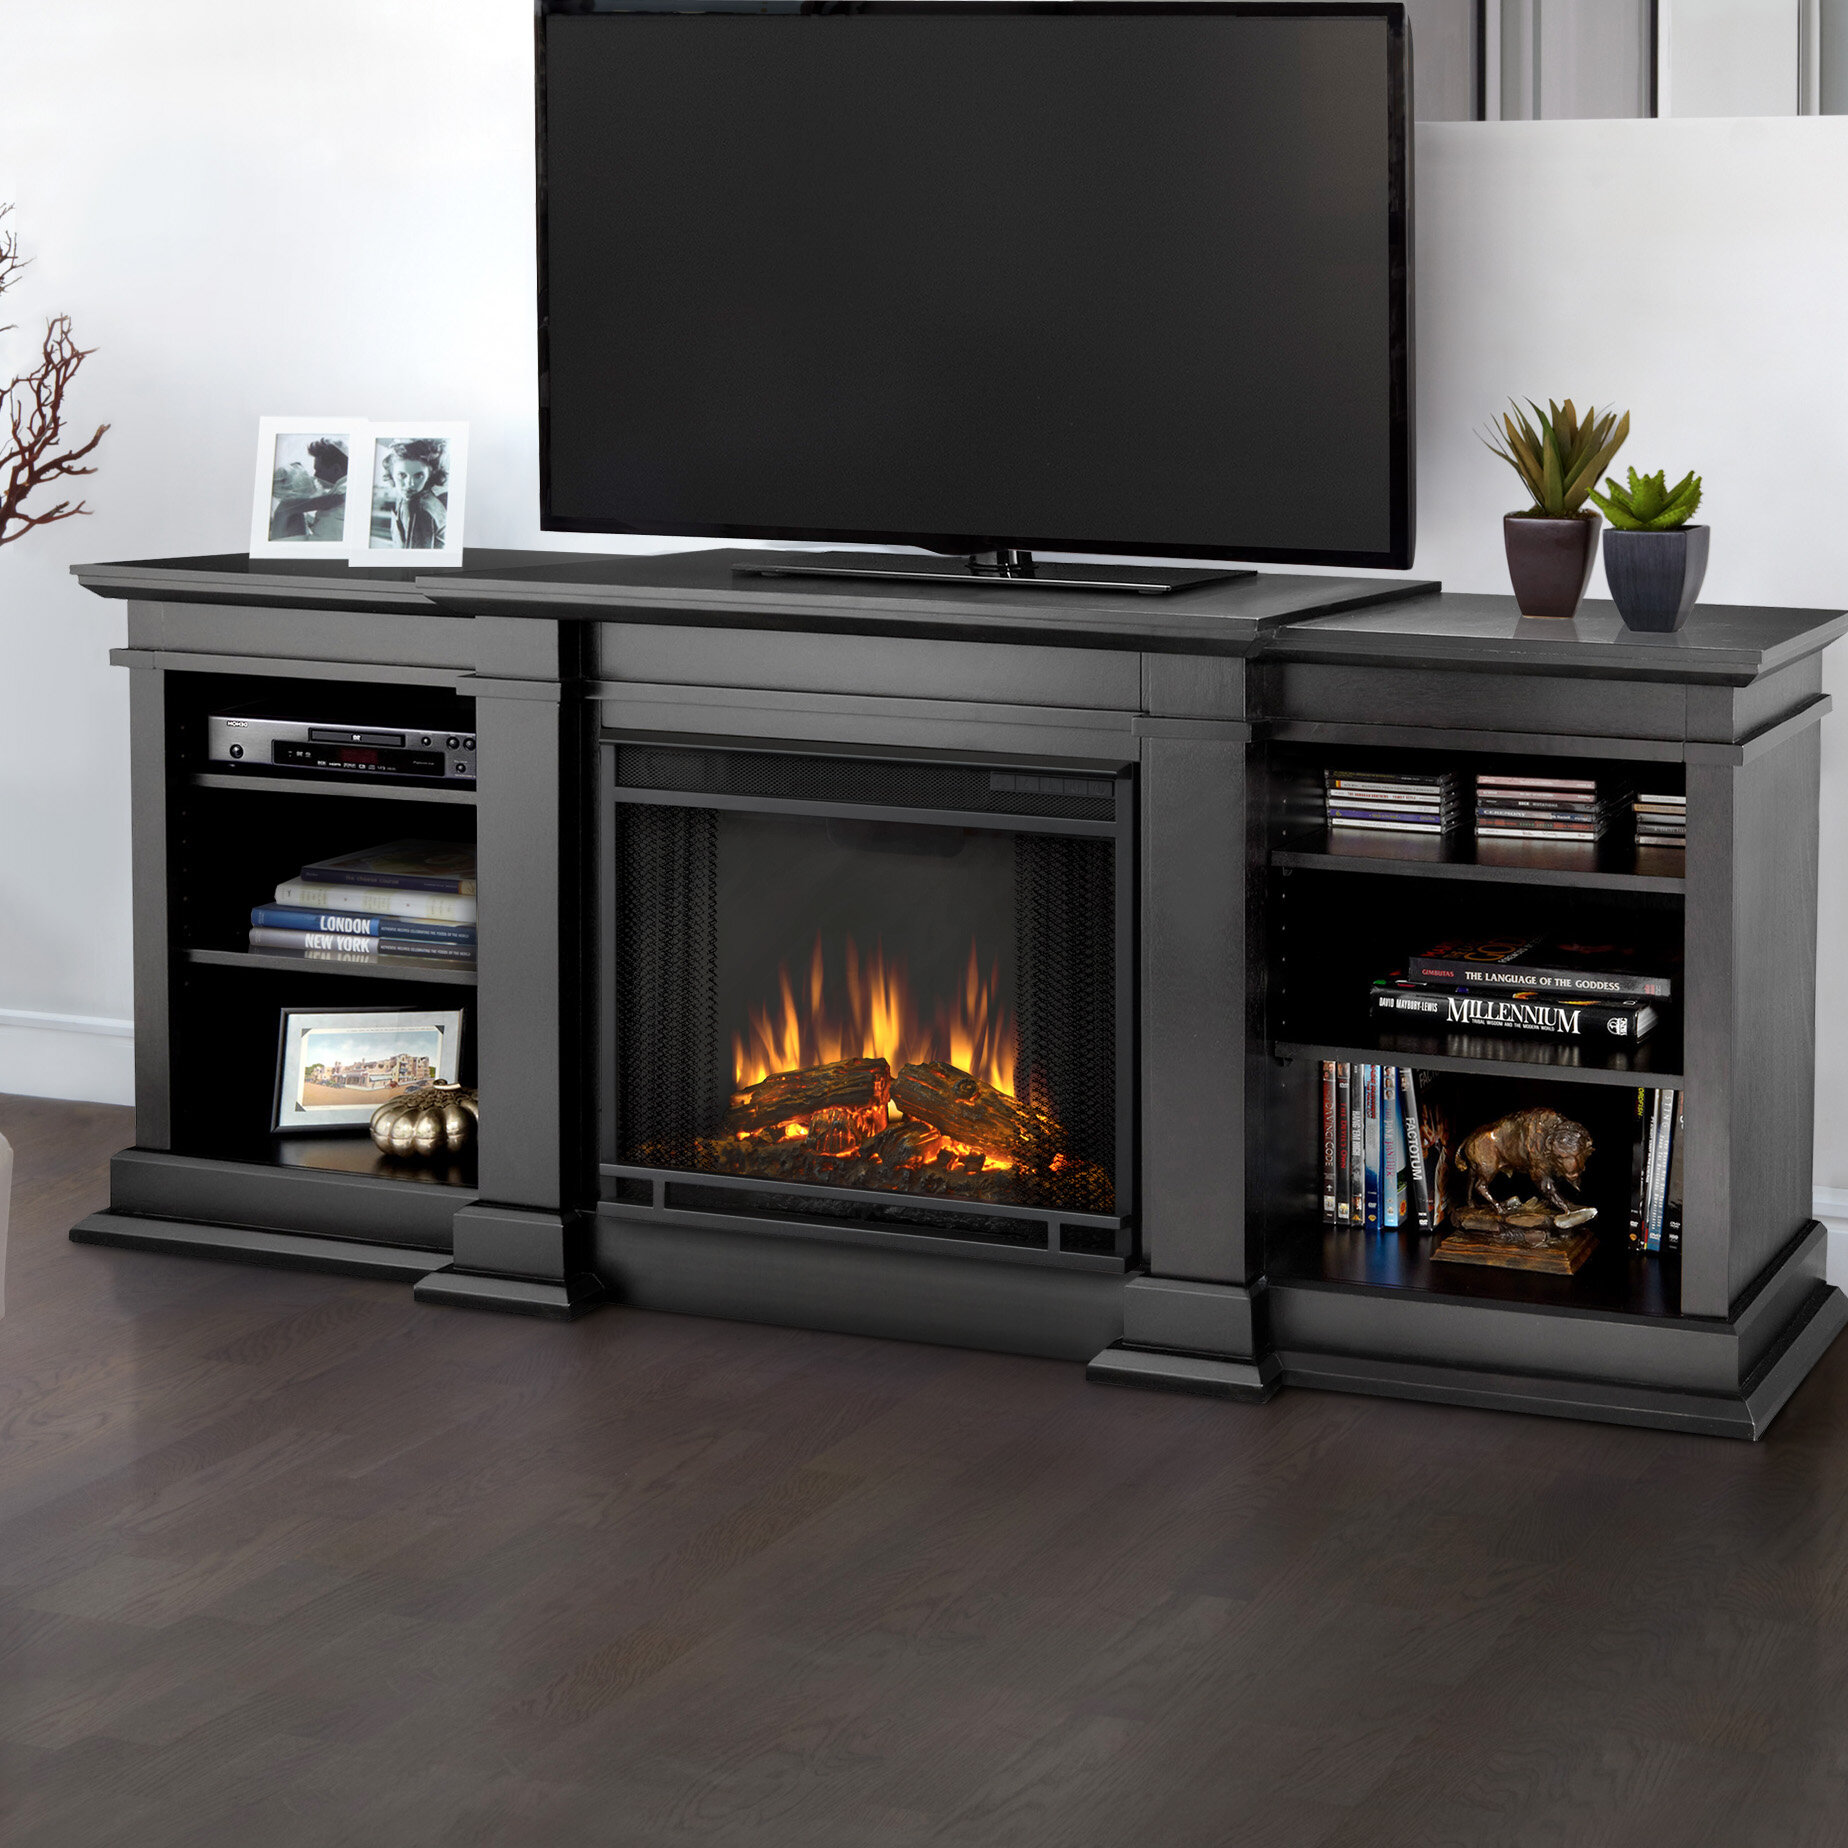 Fireplace Tv Stand Wayfair New Fresno Entertainment Center for Tvs Up to 70" with Electric Fireplace